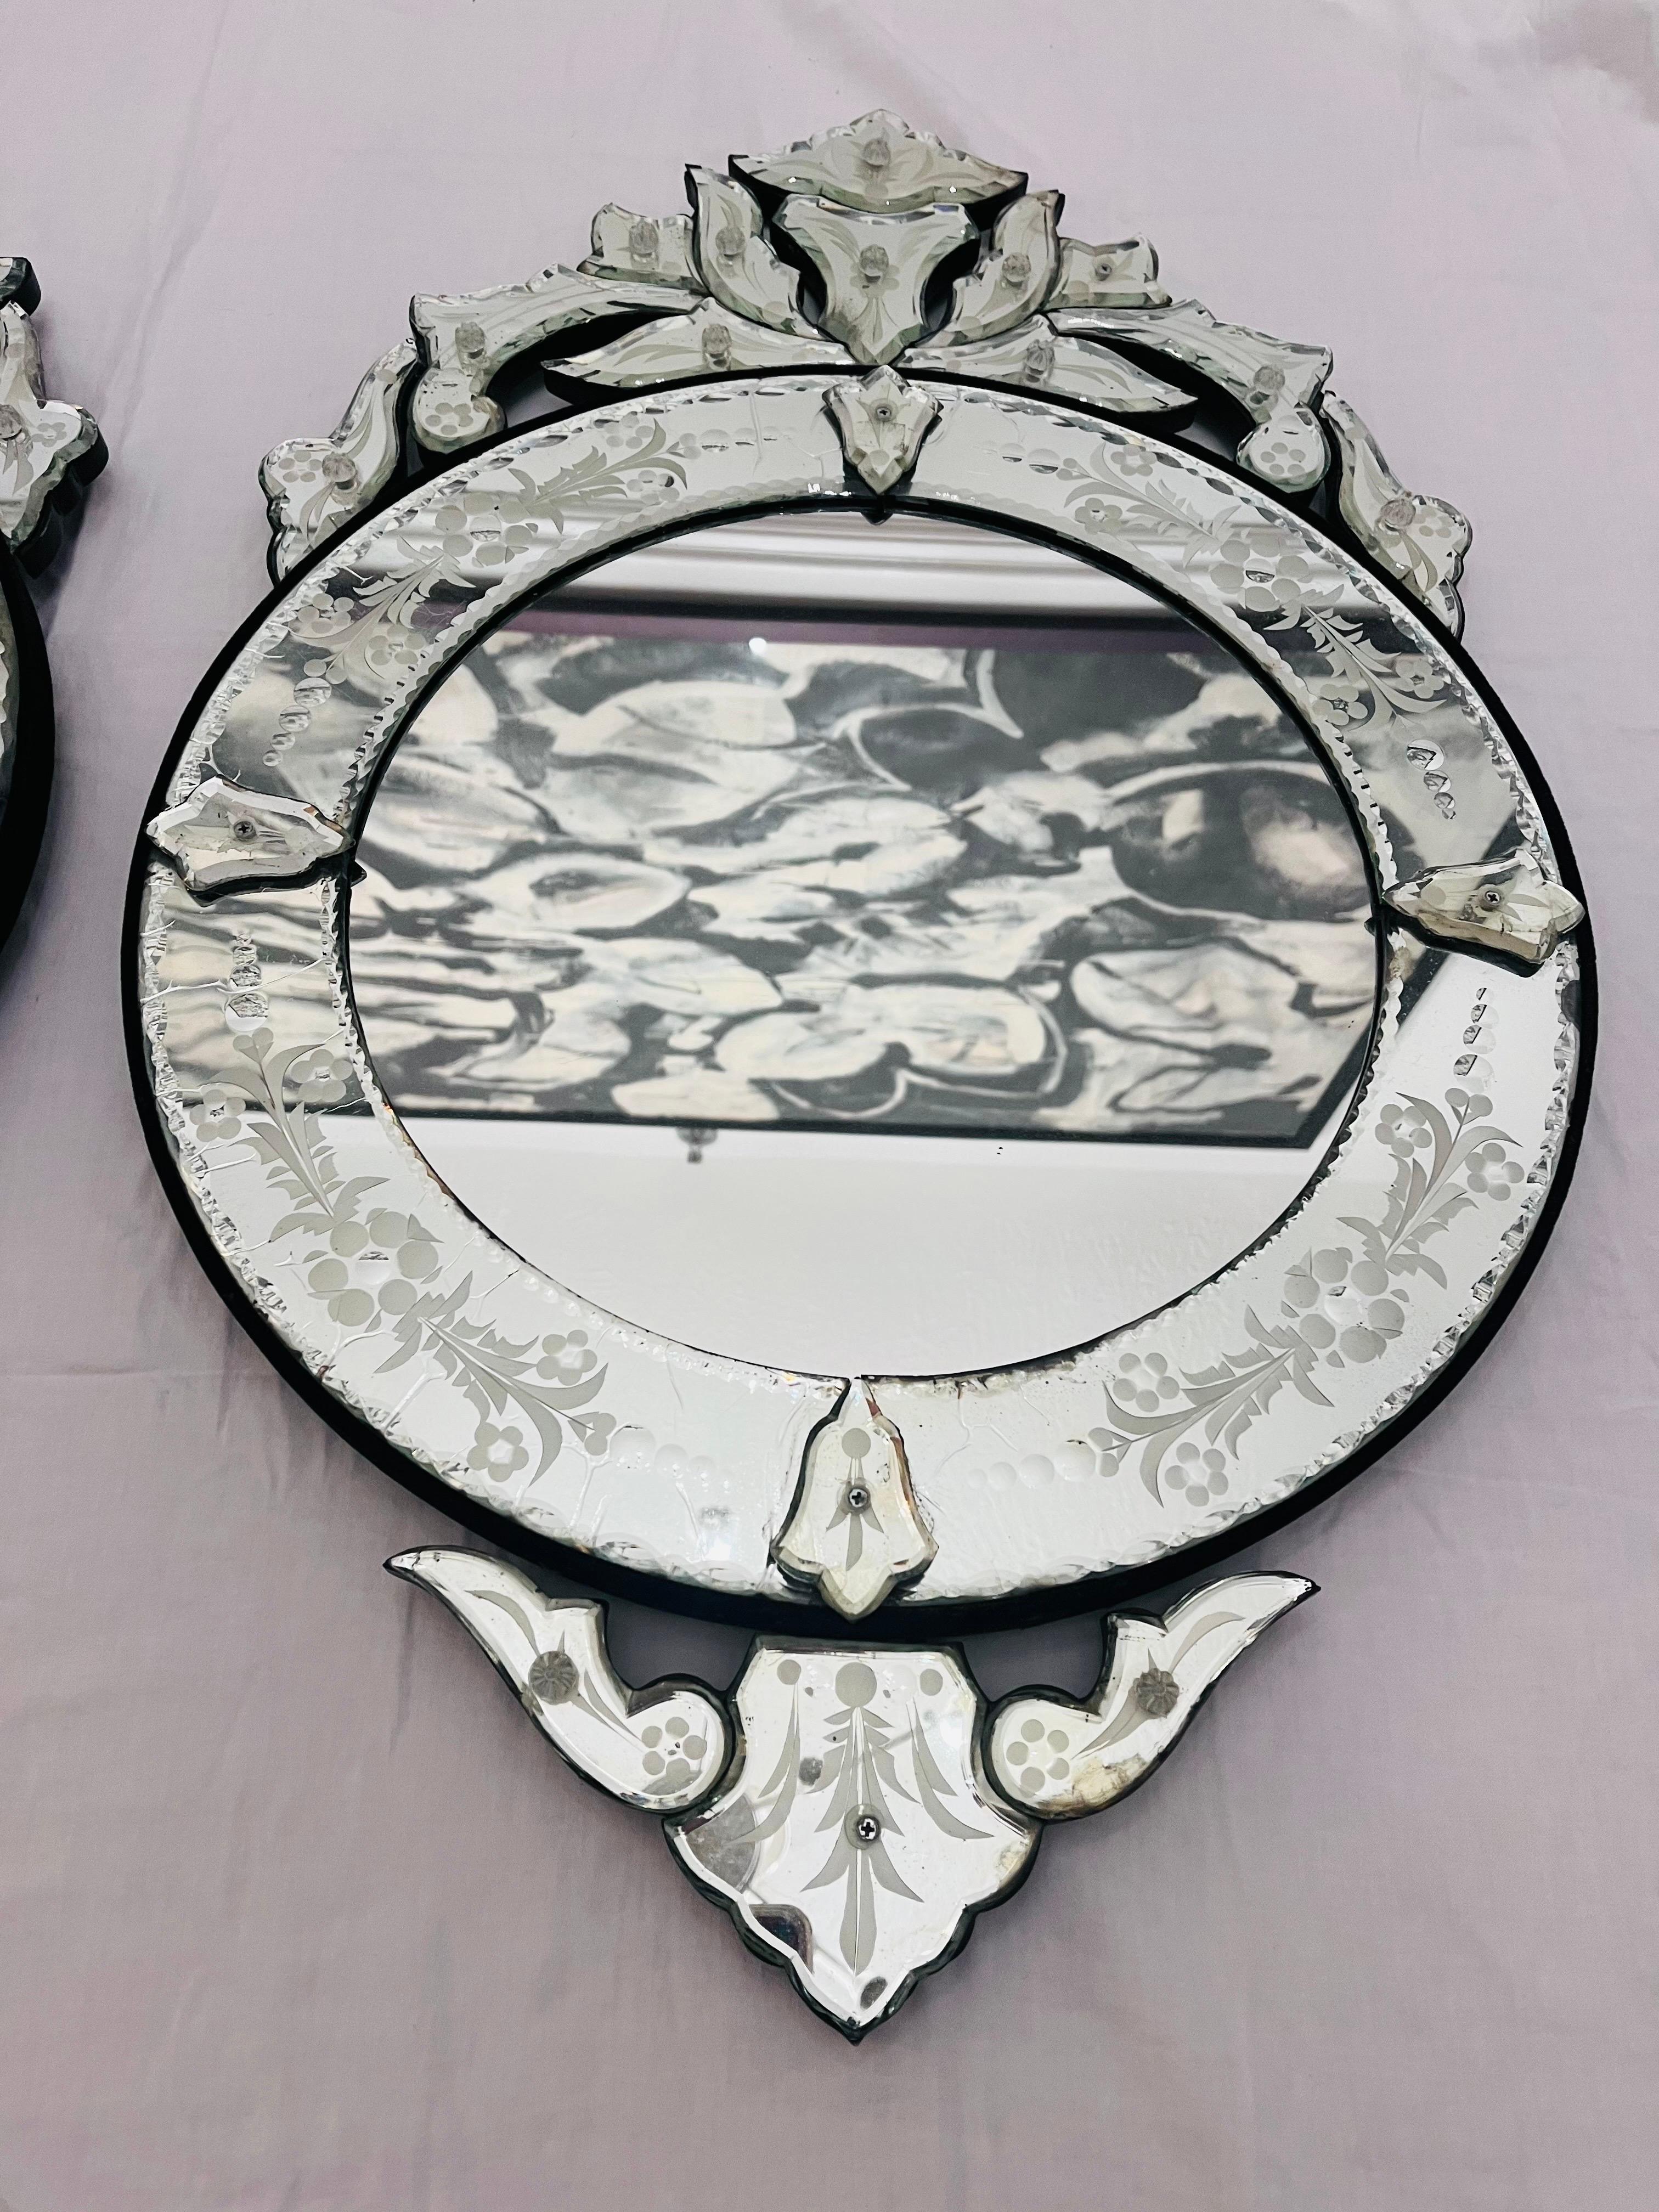 Pair of Large Ornate Venetian Mirrors of Round Tondo Form with Foliate Designs In Good Condition For Sale In Atlanta, GA